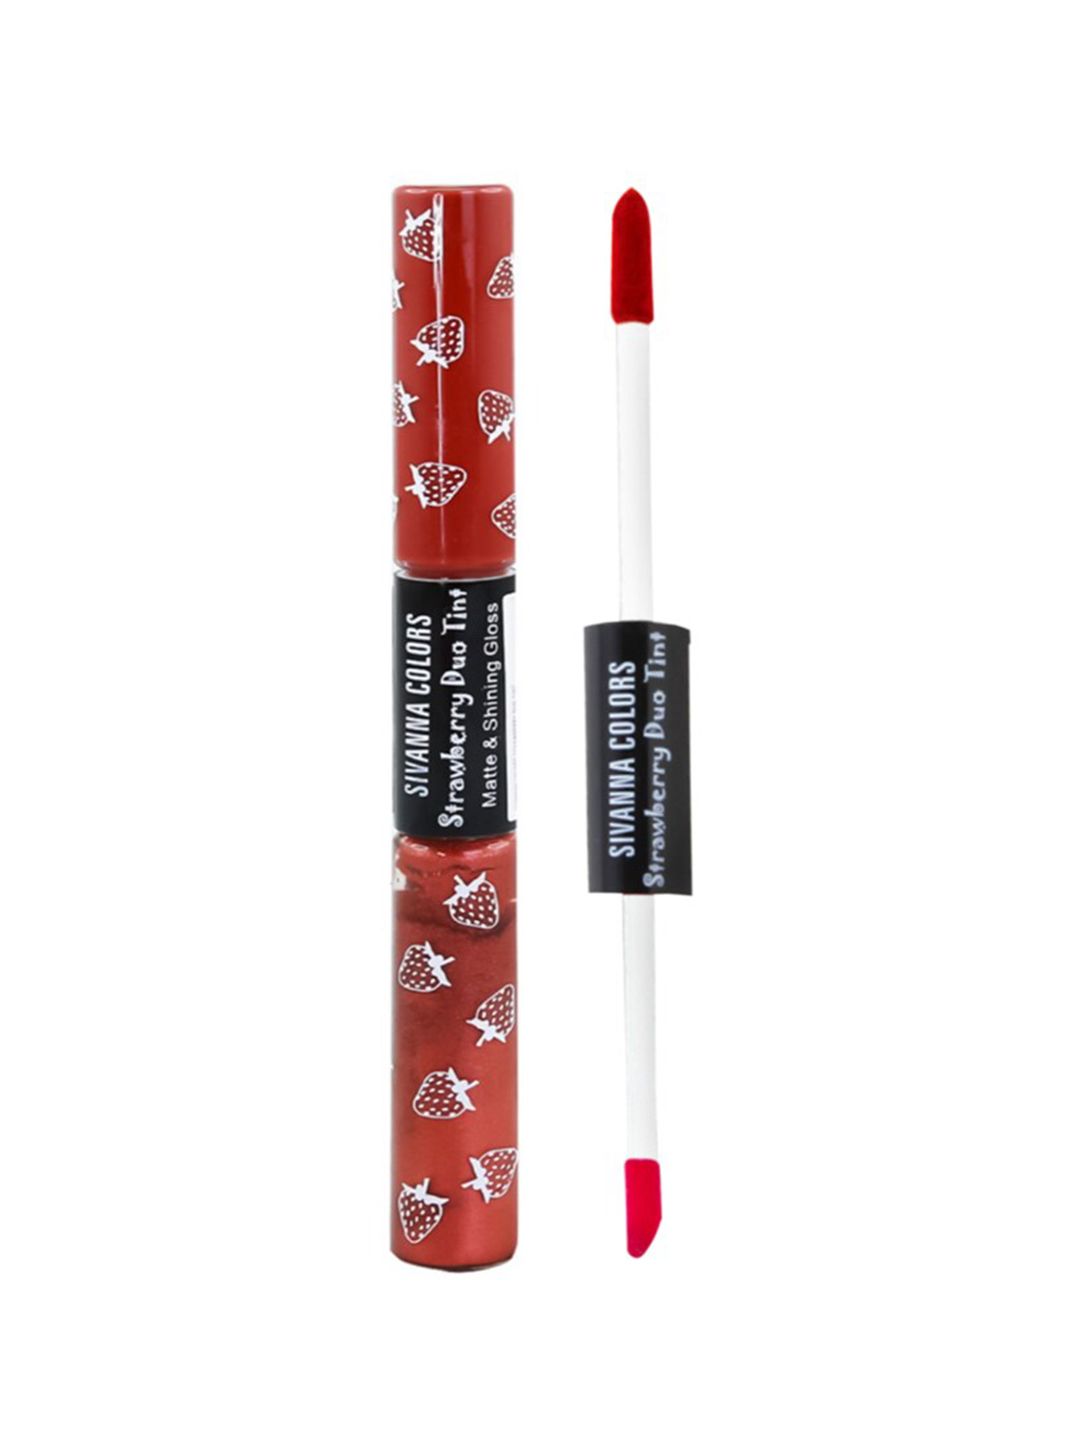 Sivanna Colors 2 in 1 Strawberry Duo Tint Matte & Shining Lip Gloss - DK035 01 Price in India